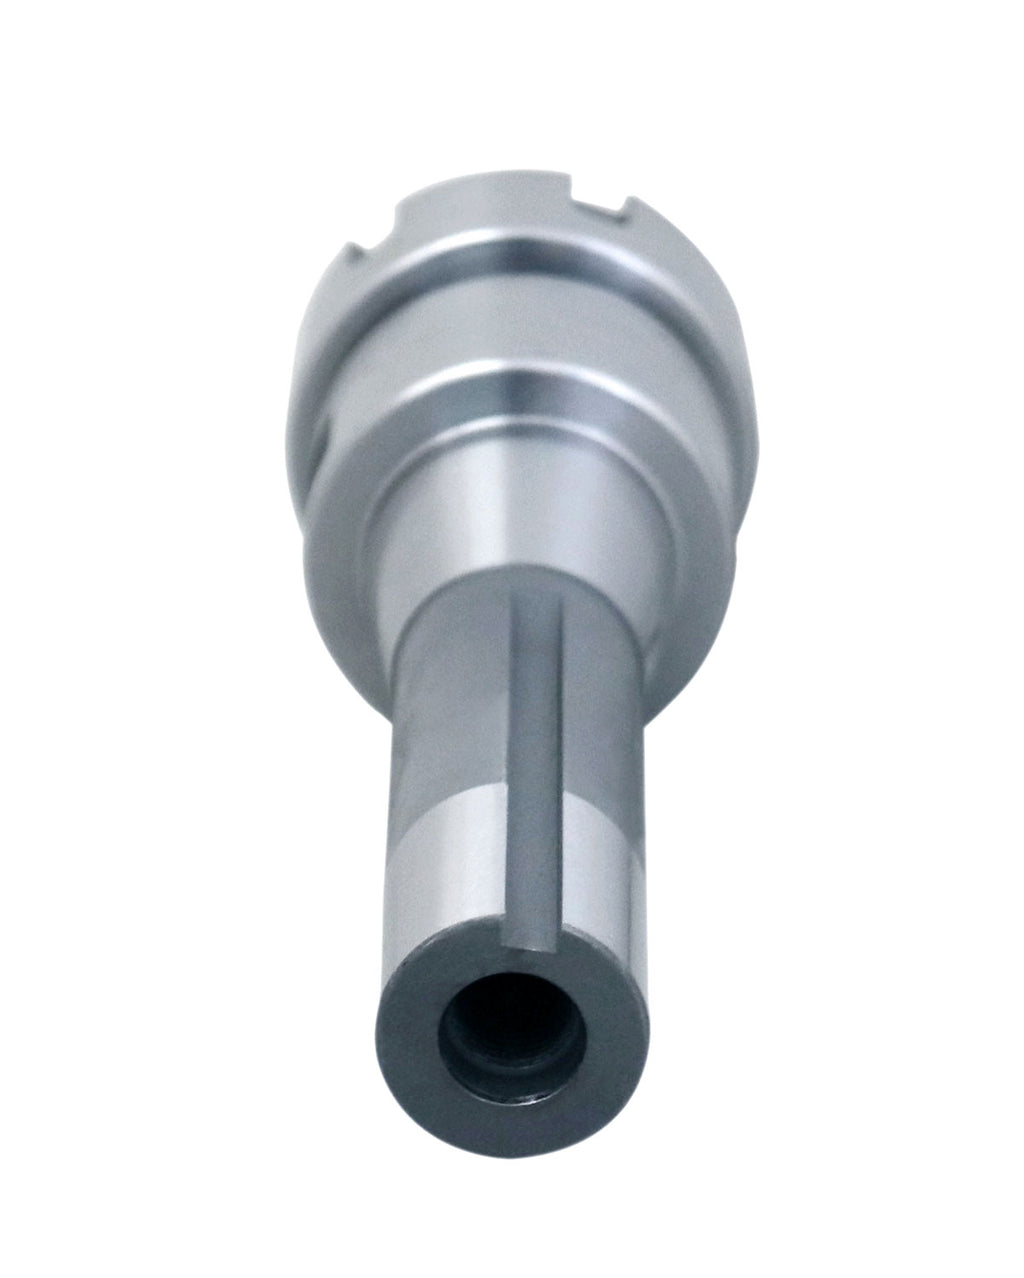 ER-32 Collet Systems with R8 Shank, Accusize Industrial Tools